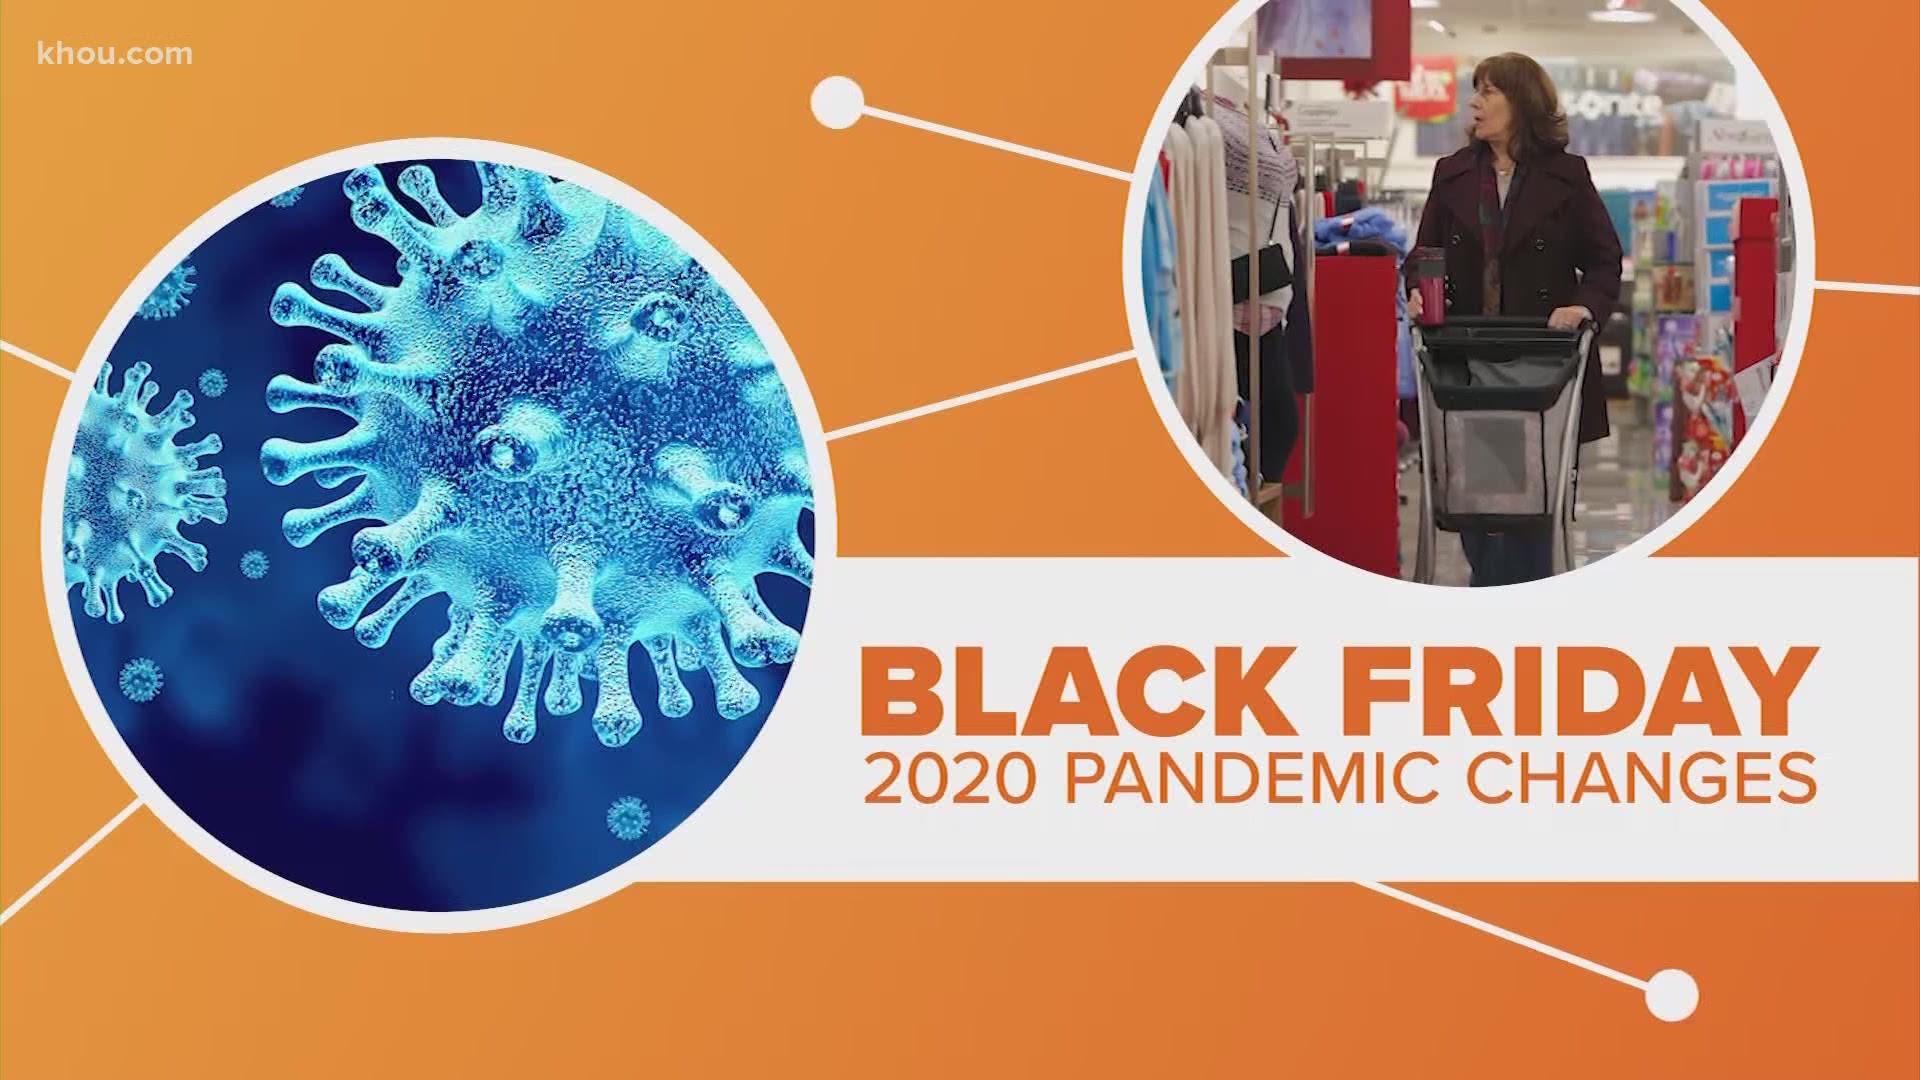 Home Depot releases 2020 Black Friday ad with extended shopping | www.ermes-unice.fr